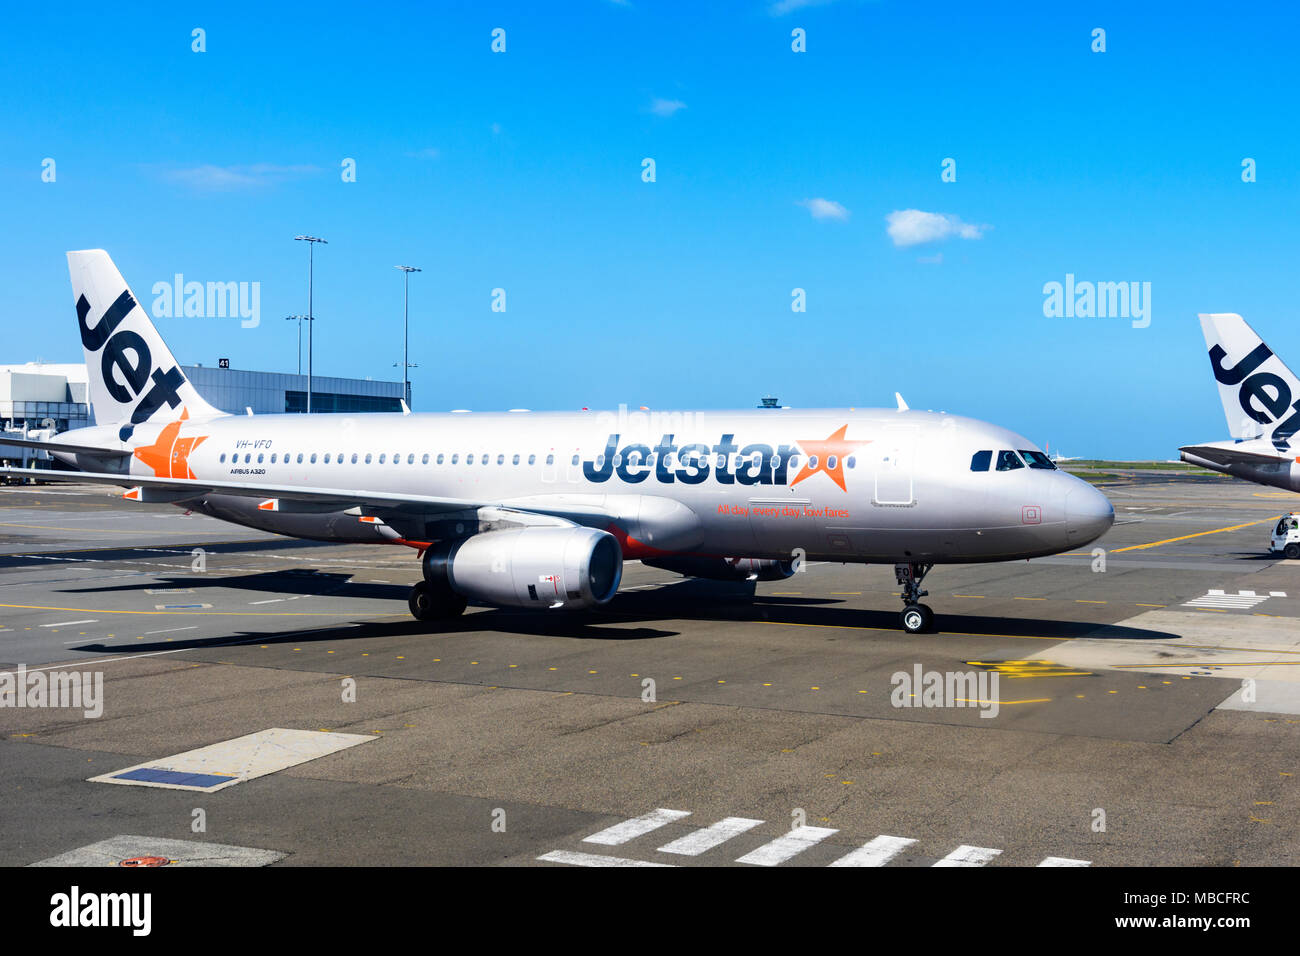 A Jetstar Airbus A320 aircraft taxiing on the tarmac at Sydney airport, domestic terminal, Australia Stock Photo